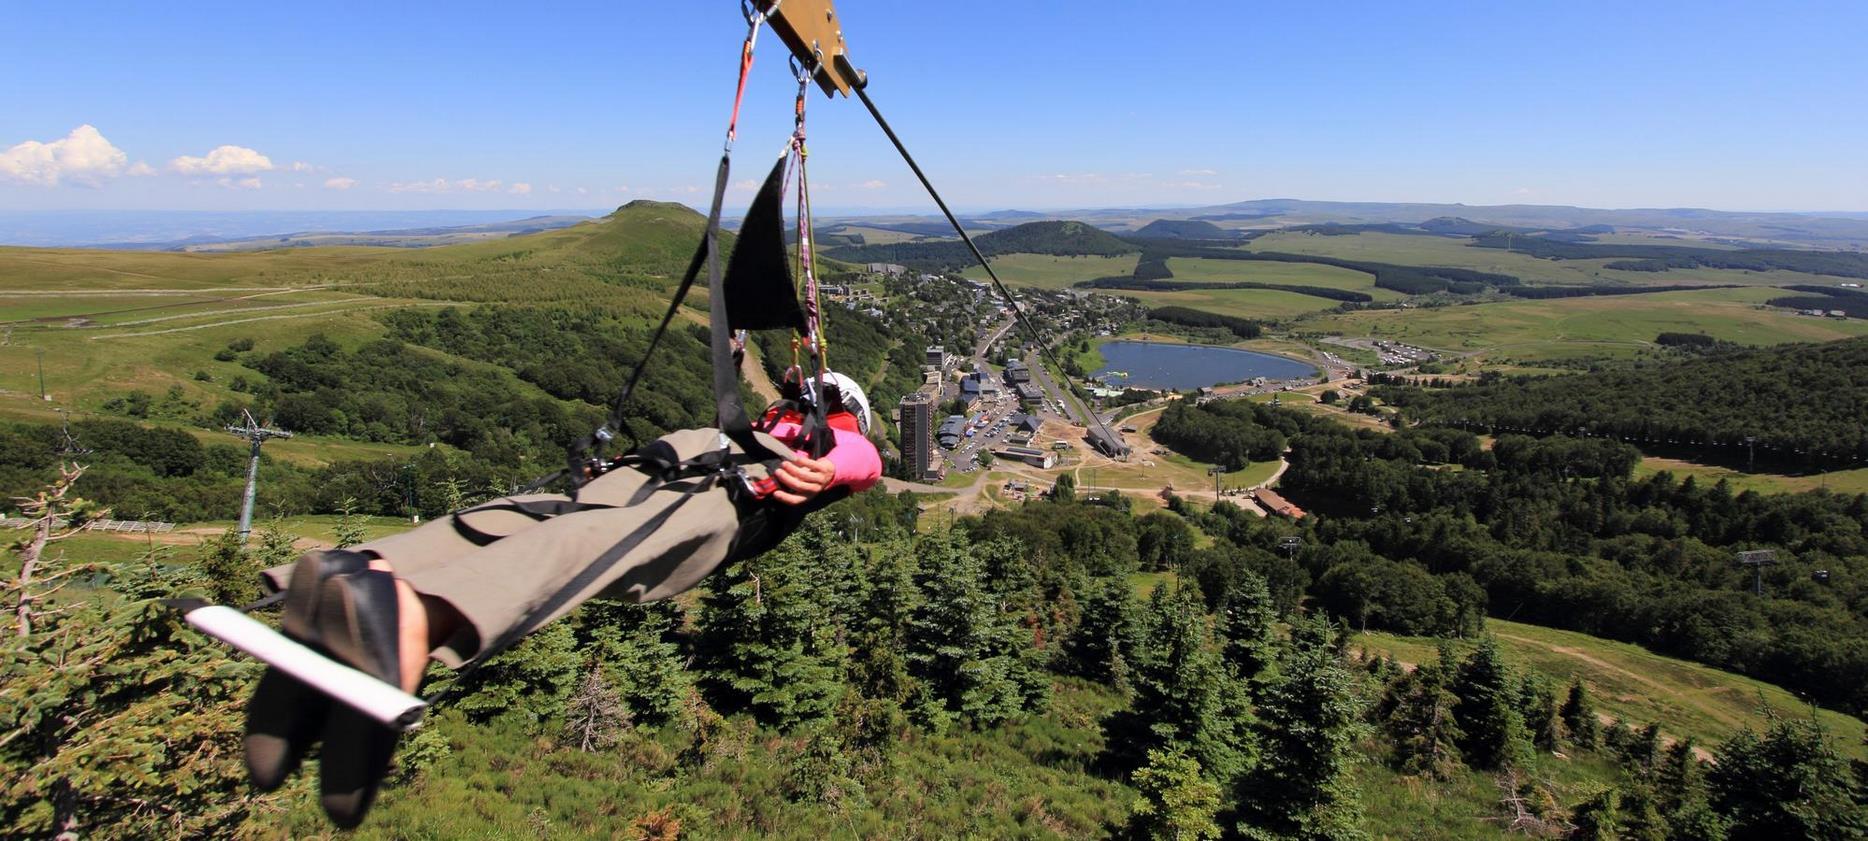 Chalet l'anorak in Super Besse- from the fantasticable Zipline